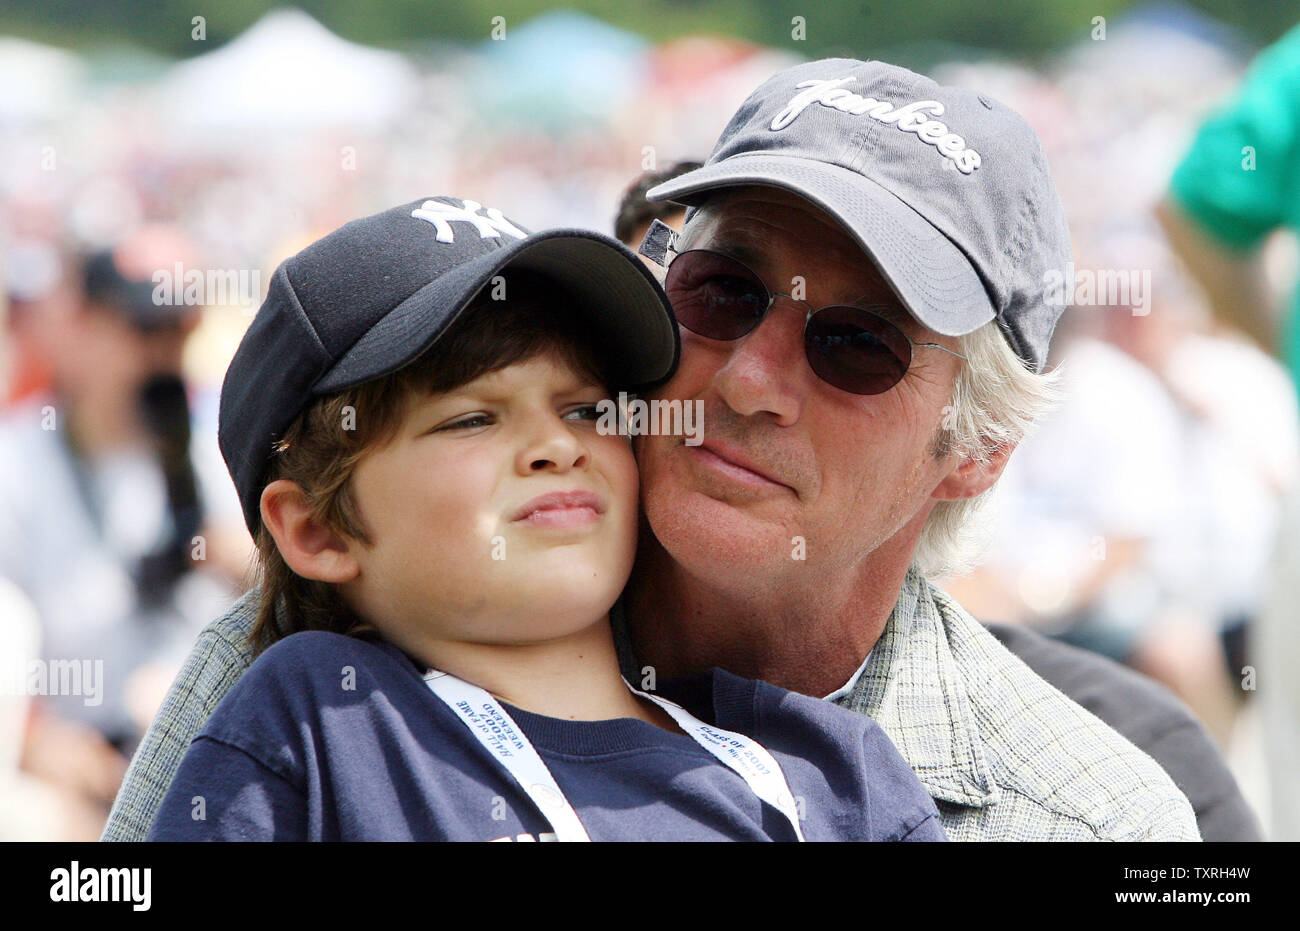 Actor Richard Gere holds son Homer as they watch the National Baseball Hall of Fame's induction ceremonies in Cooperstown, New York on July 29, 2007.  (UPI Photo/Bill Greenblatt) Stock Photo